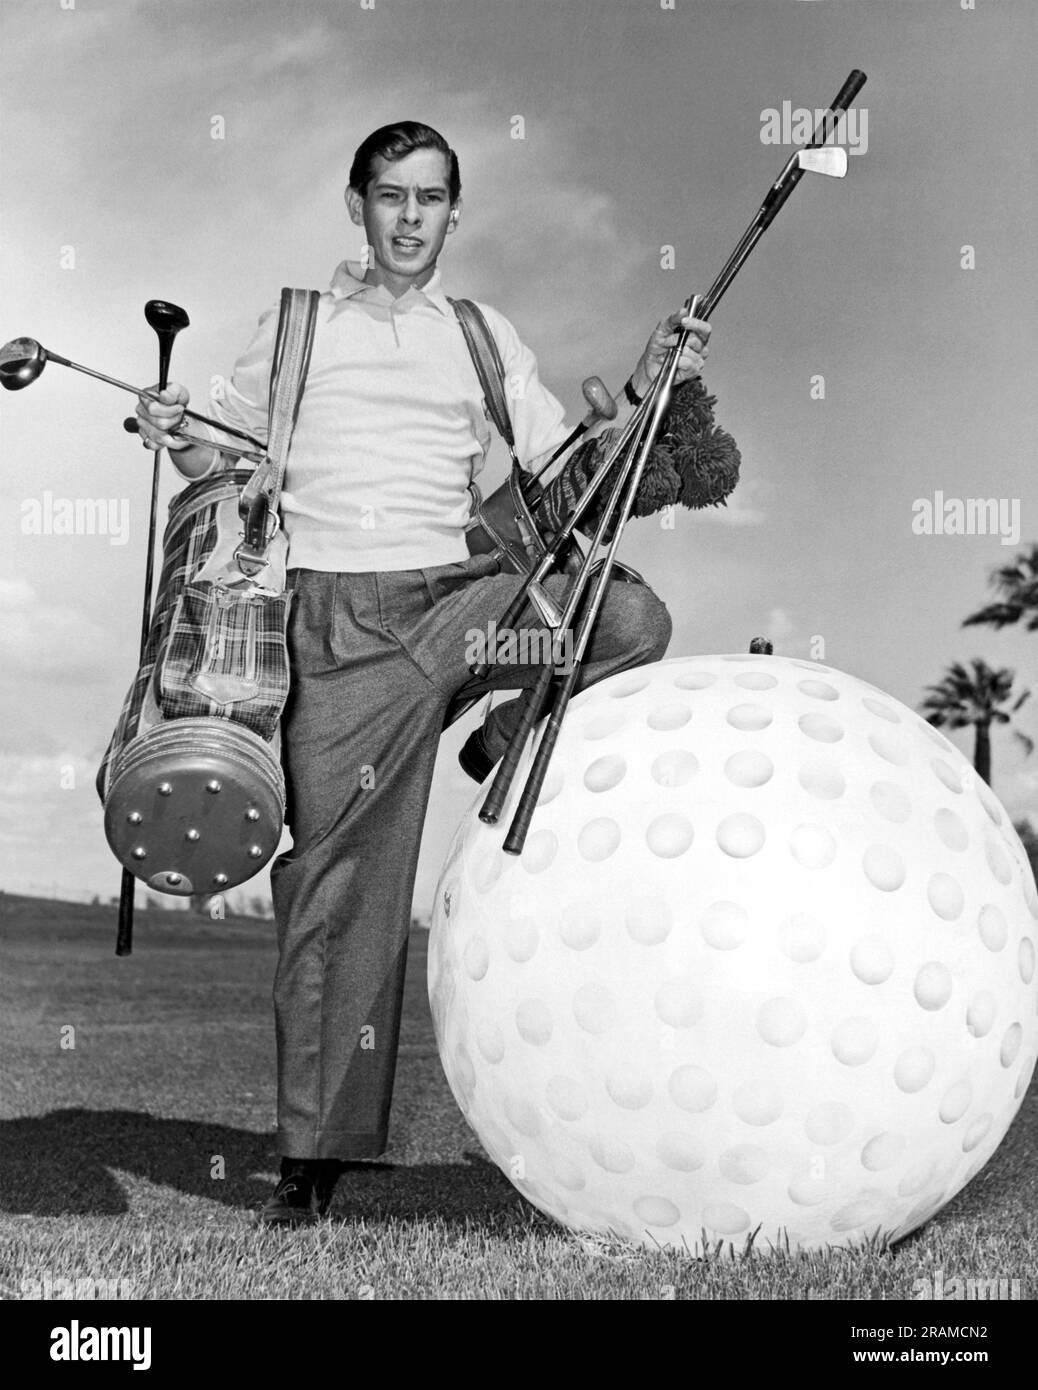 Las Vegas, Nevada:  c. 1958. A golfer holding two bags of clubs in search of one big enough for a three foot golf ball. Stock Photo